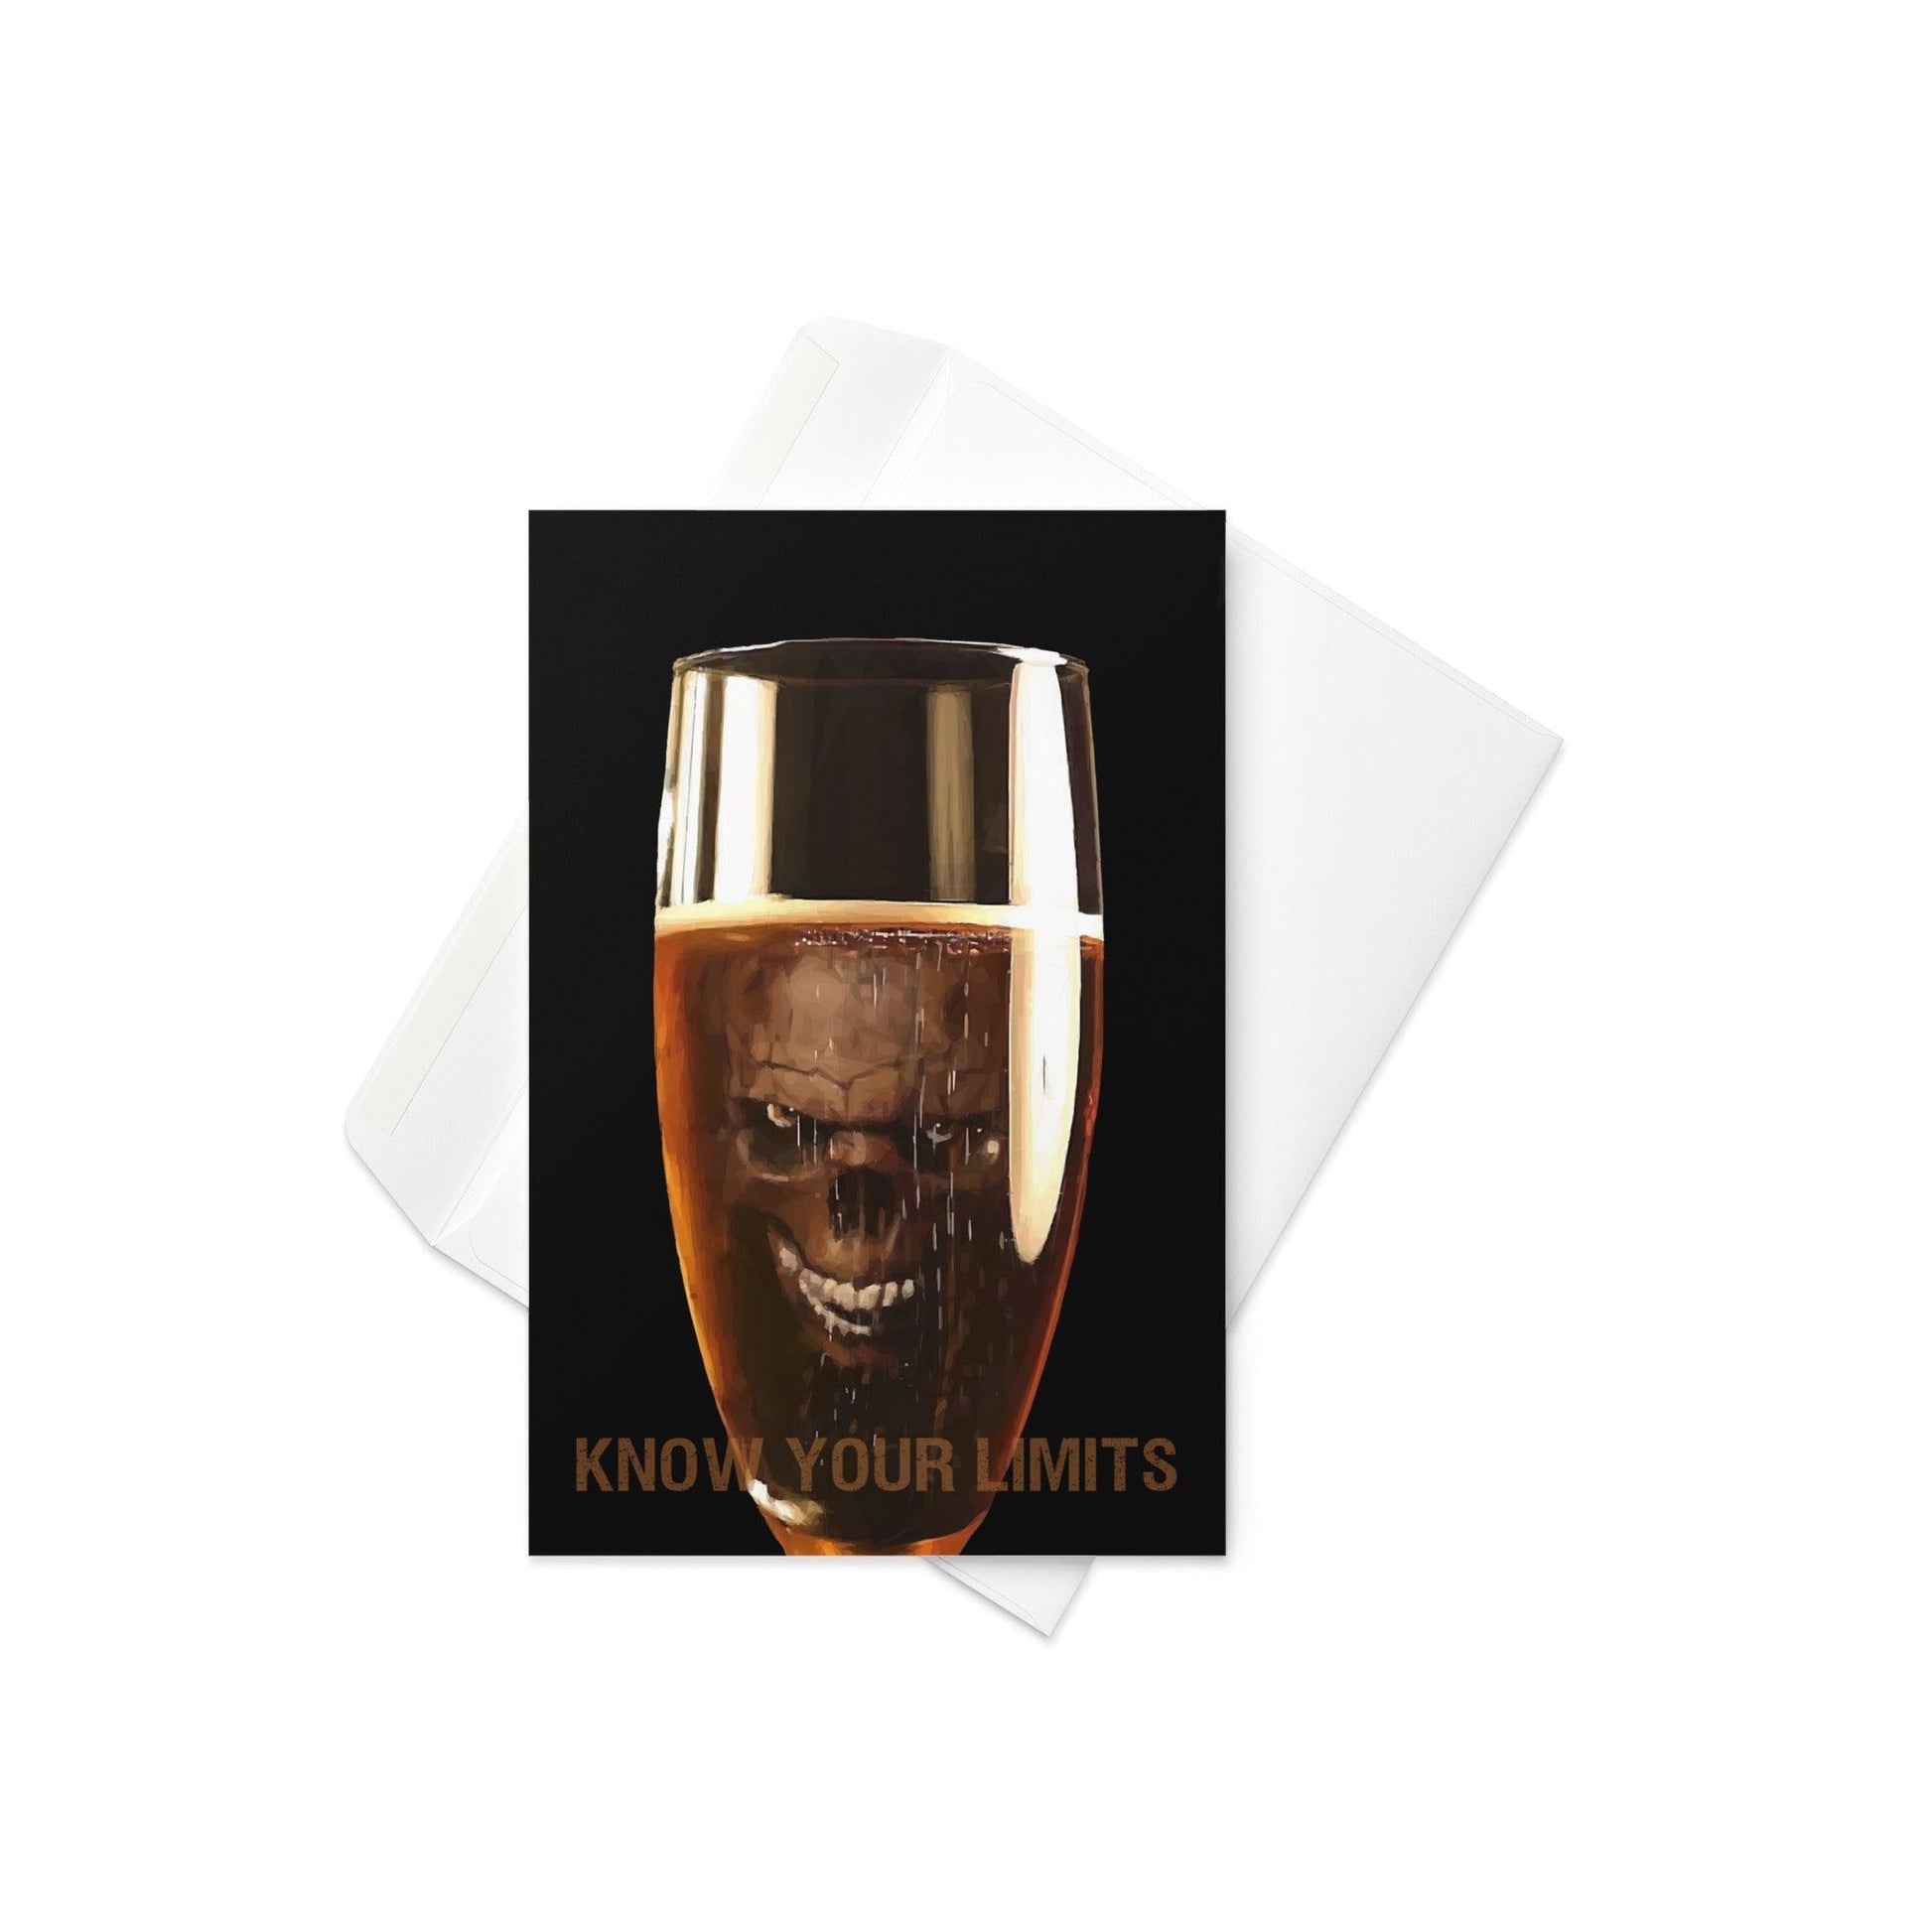 Alcohol - Know Your Limits - Note Card - iSAW Company